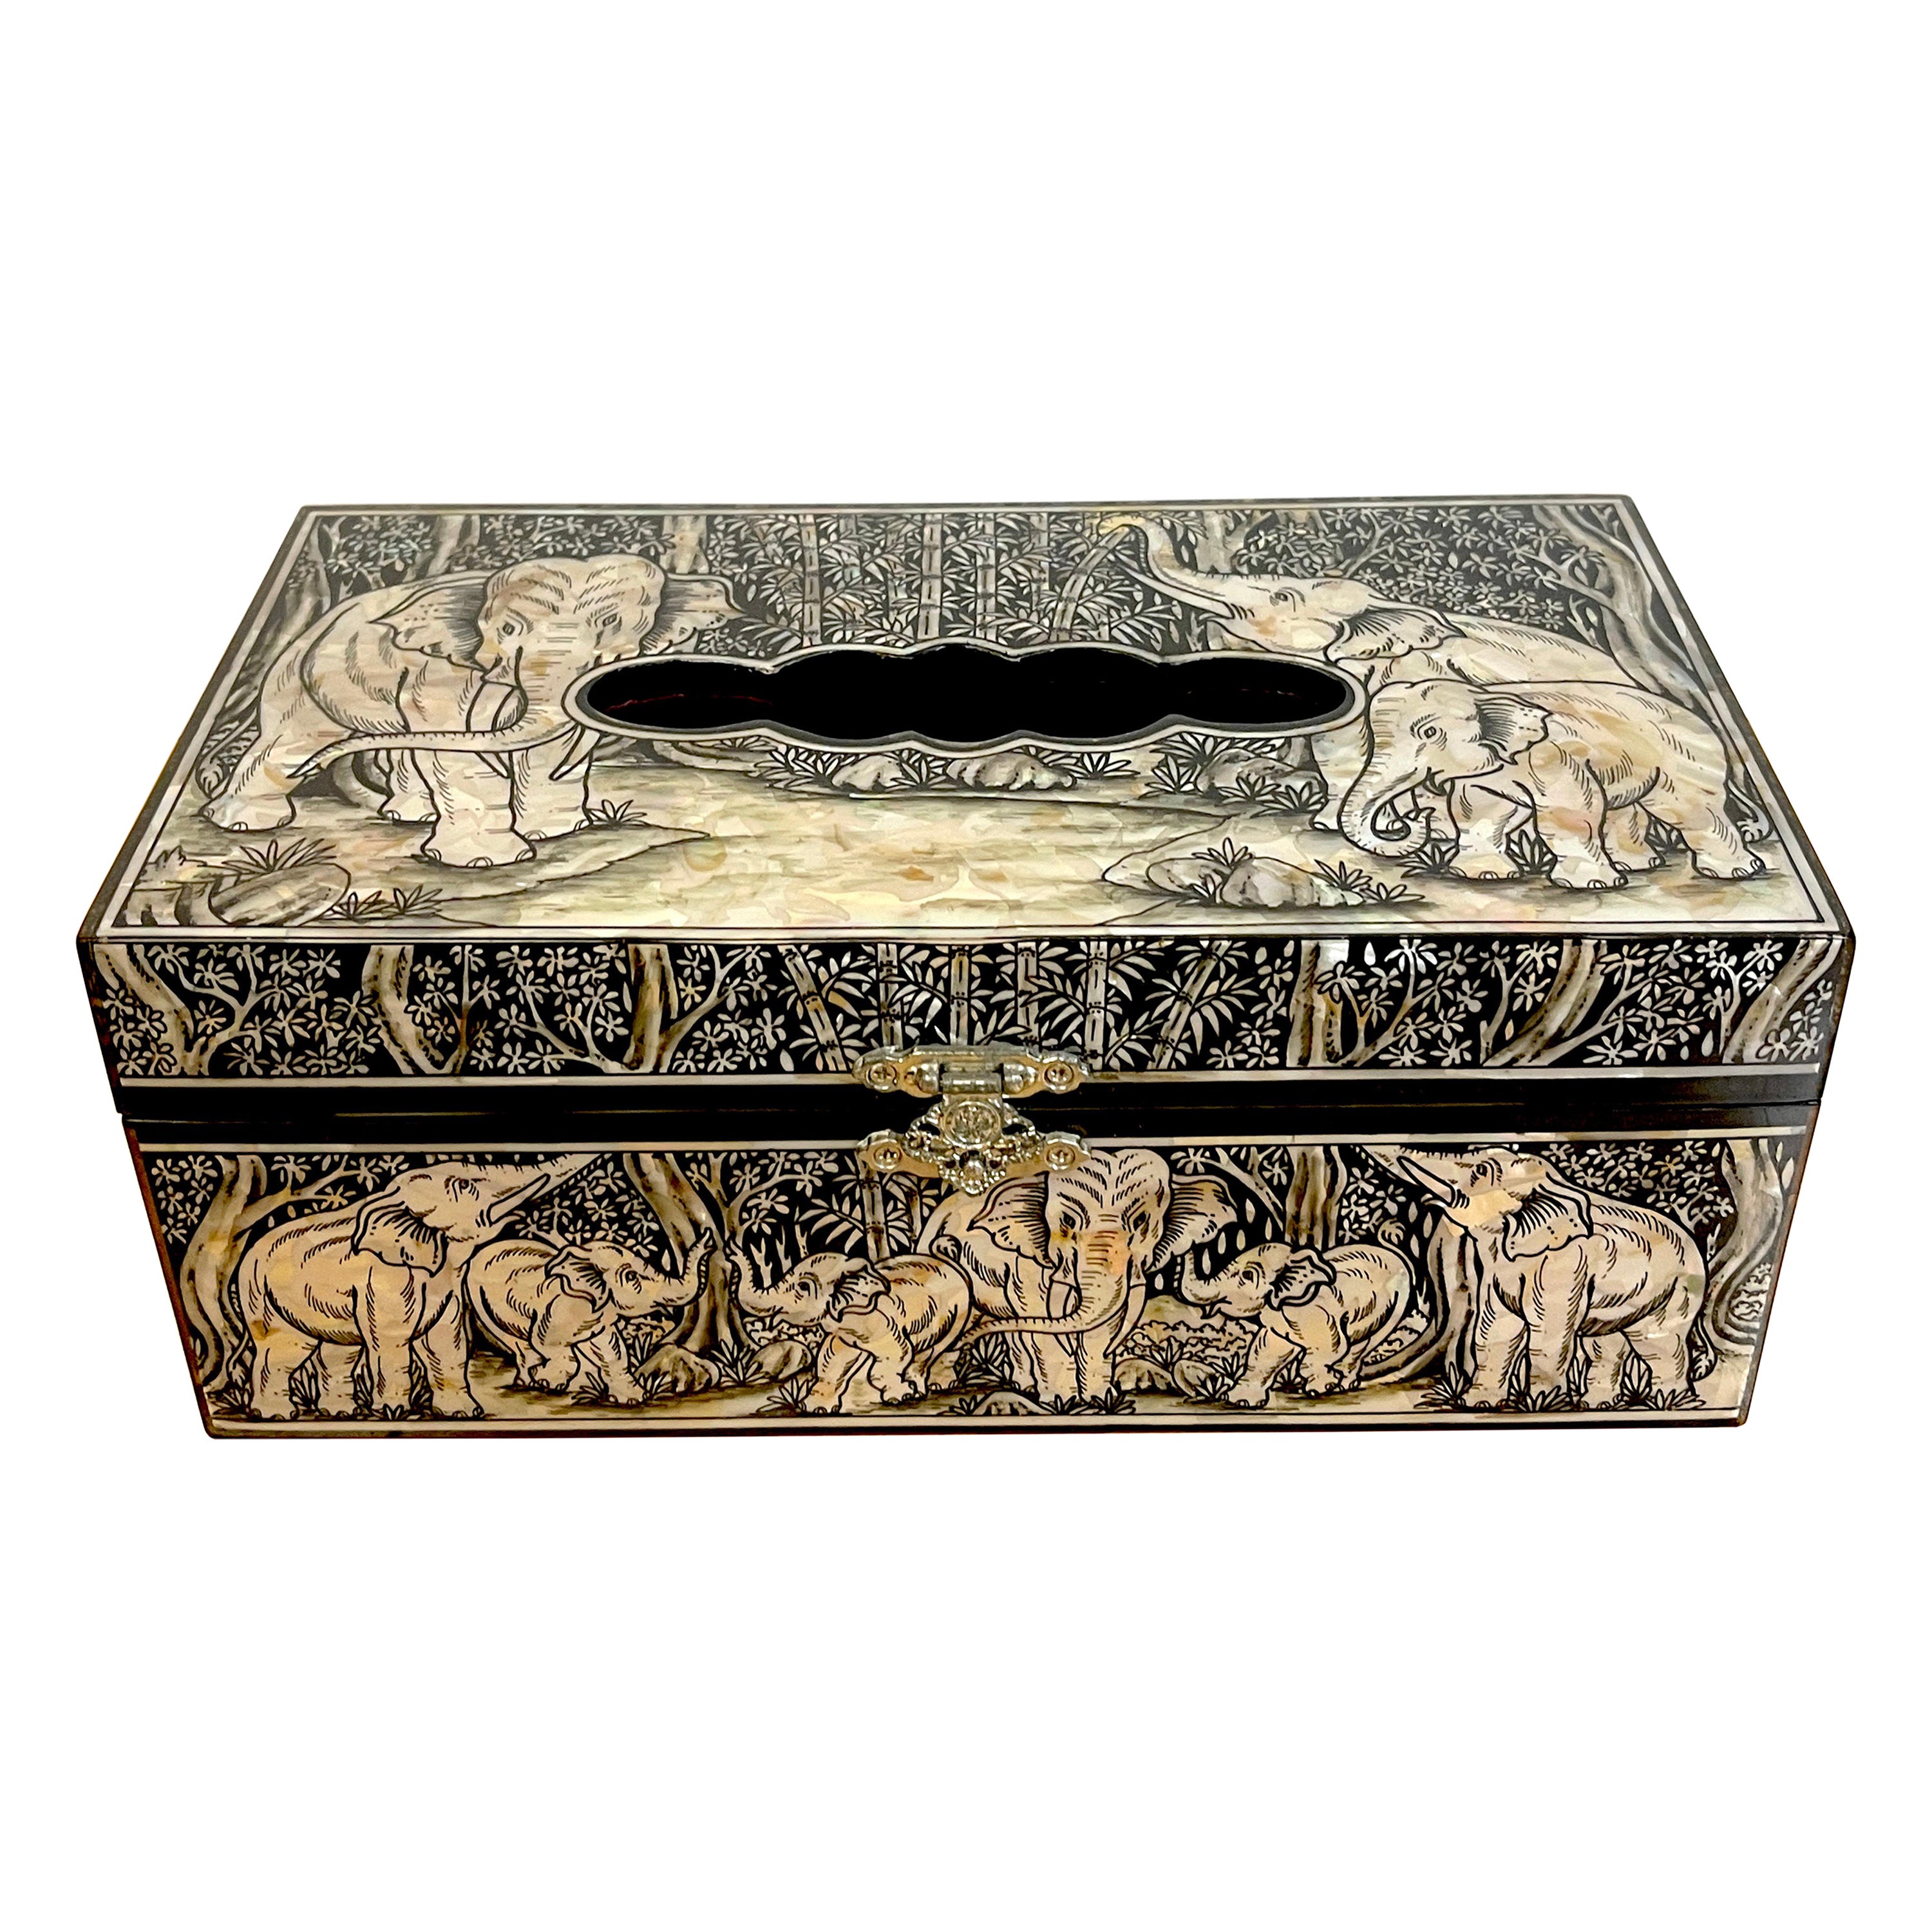 Exquisite Mother of Pearl Inlaid Lacquer Elephant Motif Tissue Box